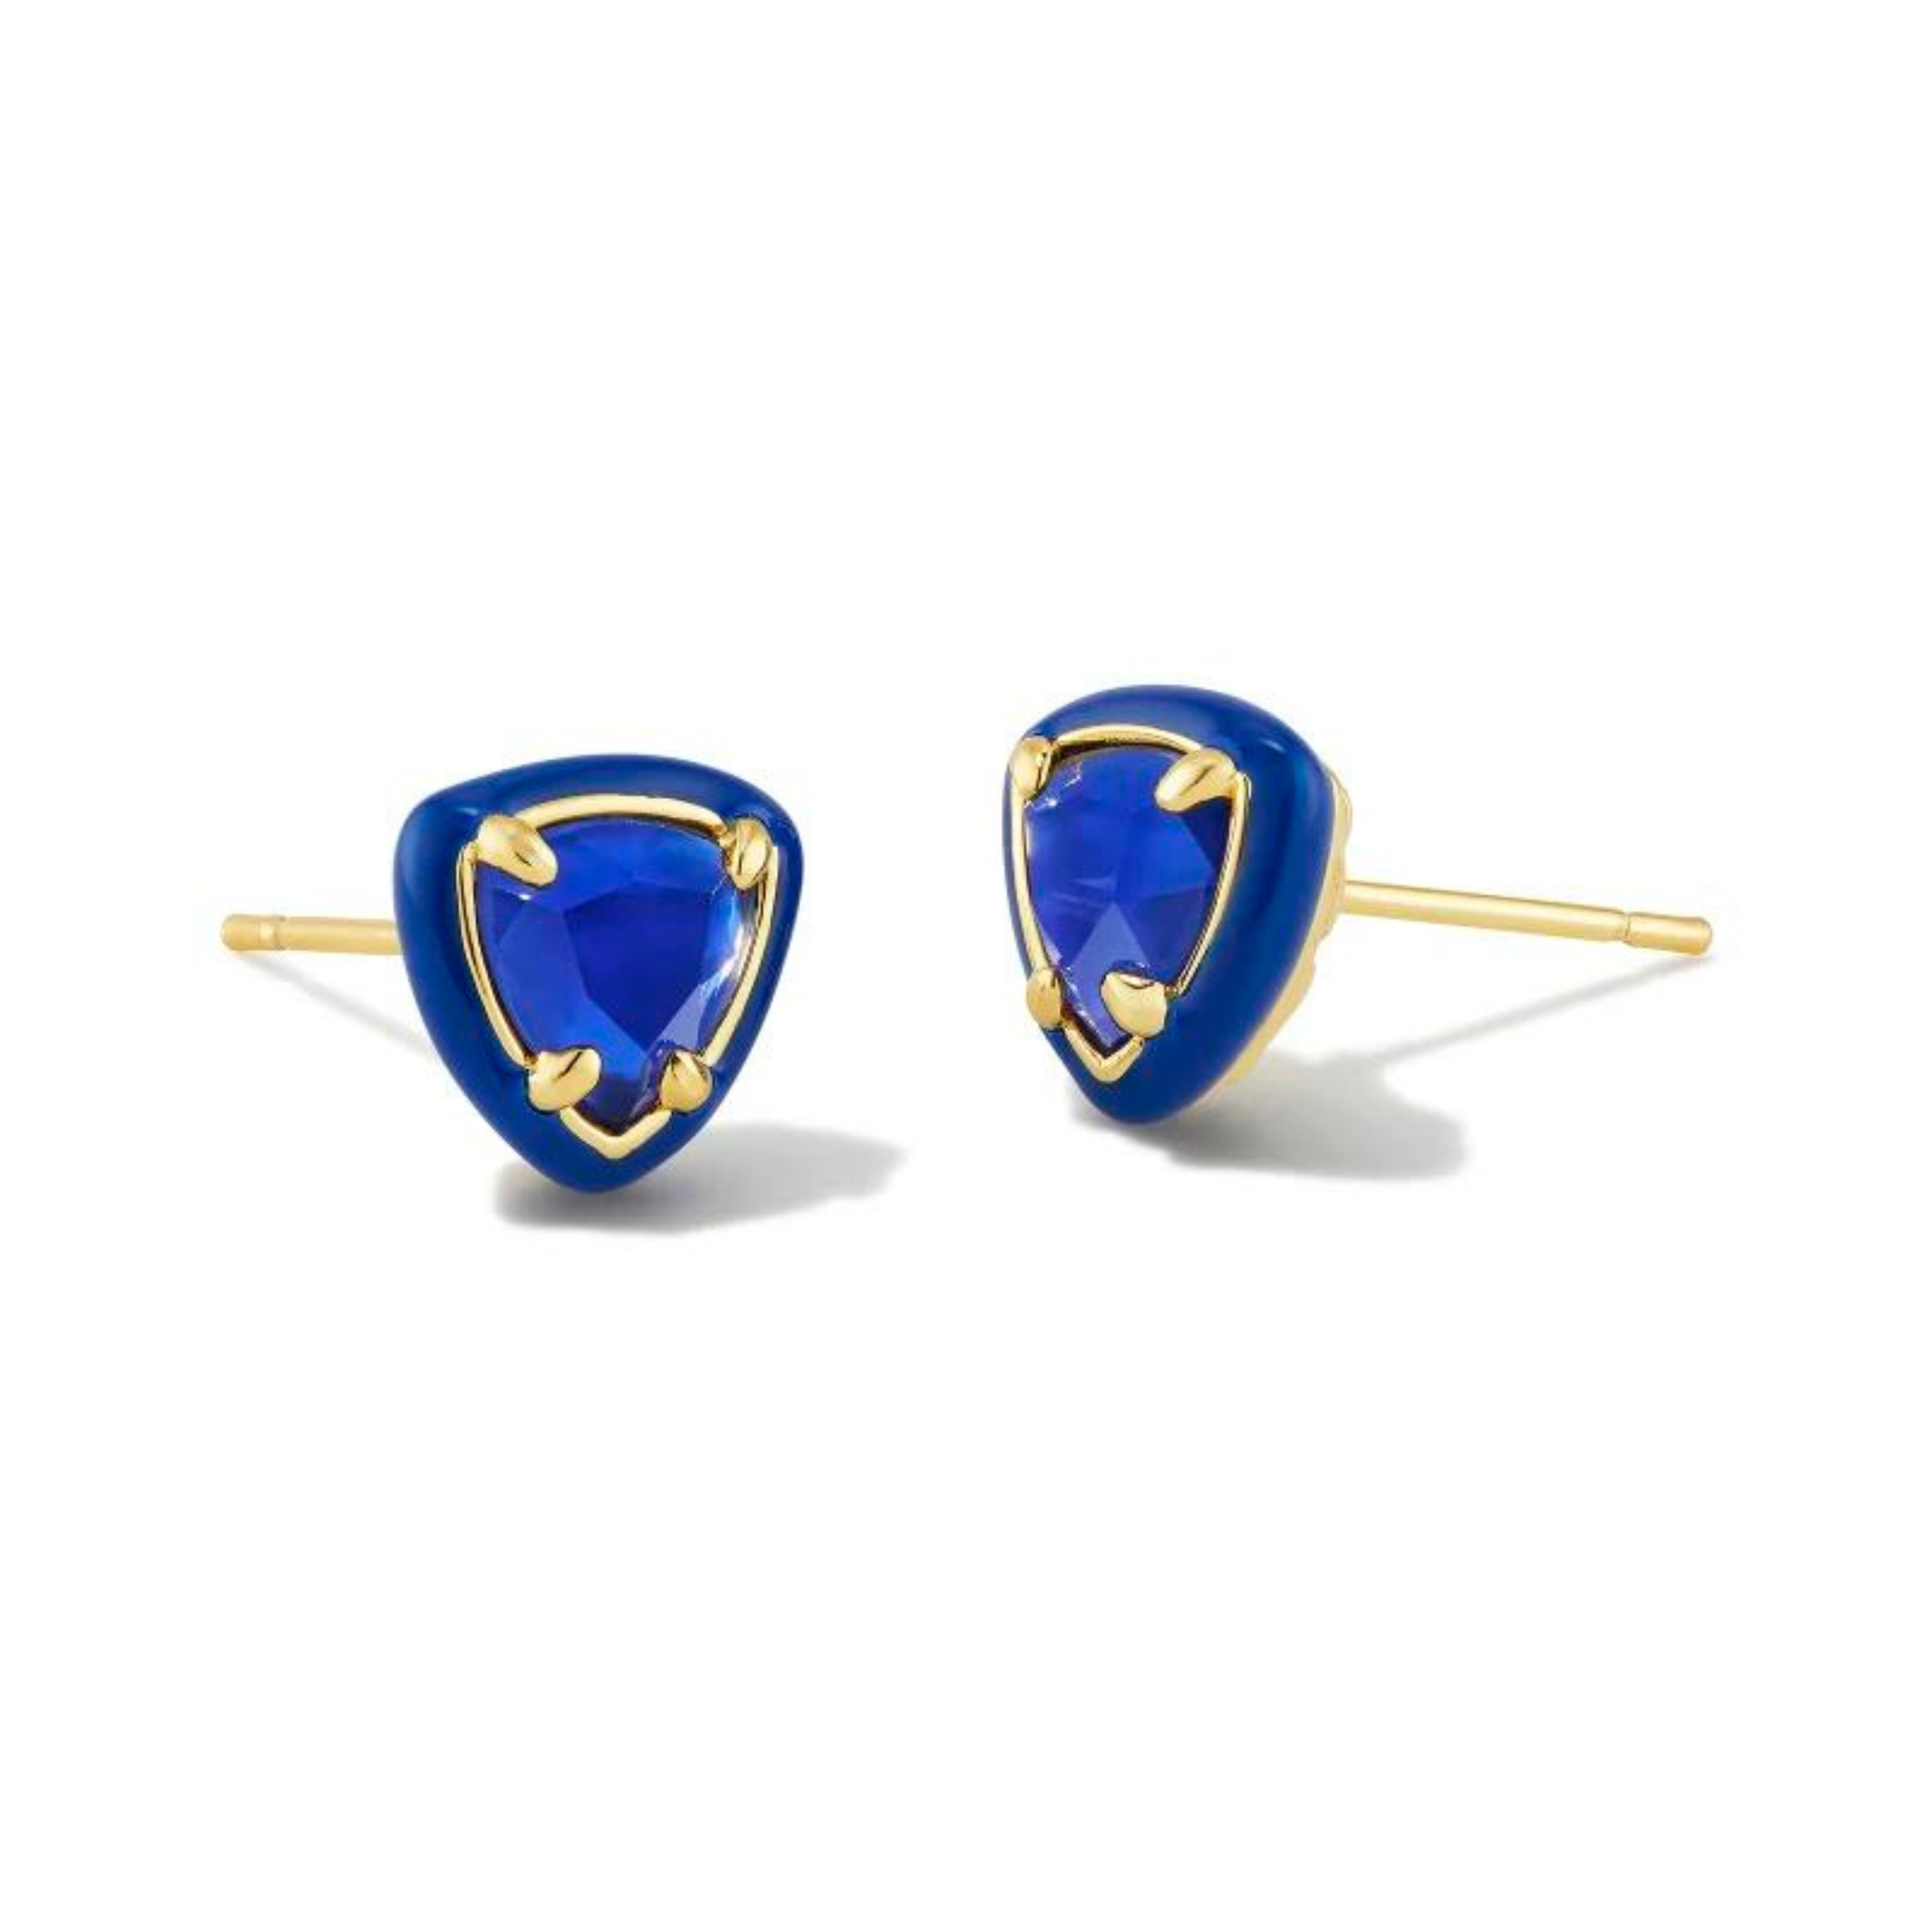 Cobalt blue framed, triangle shaped stud earrings with a center blue stone and a gold ear post. These earrings are pictured on a white background. 